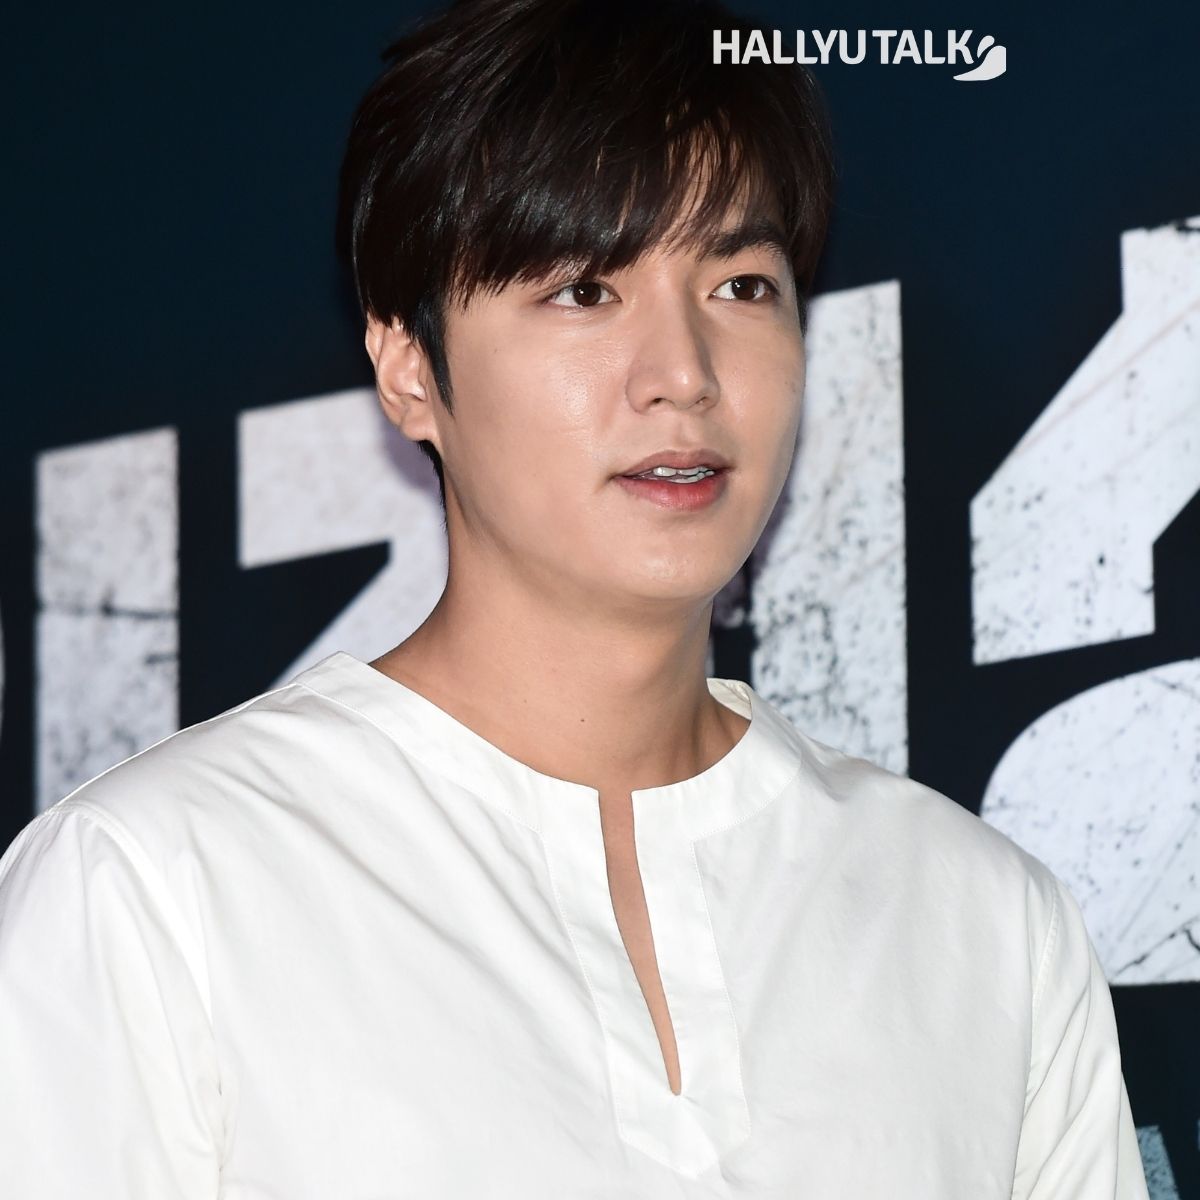 Dear Oppa: An African Minoz says Lee Min Ho is 'destined to be an ...